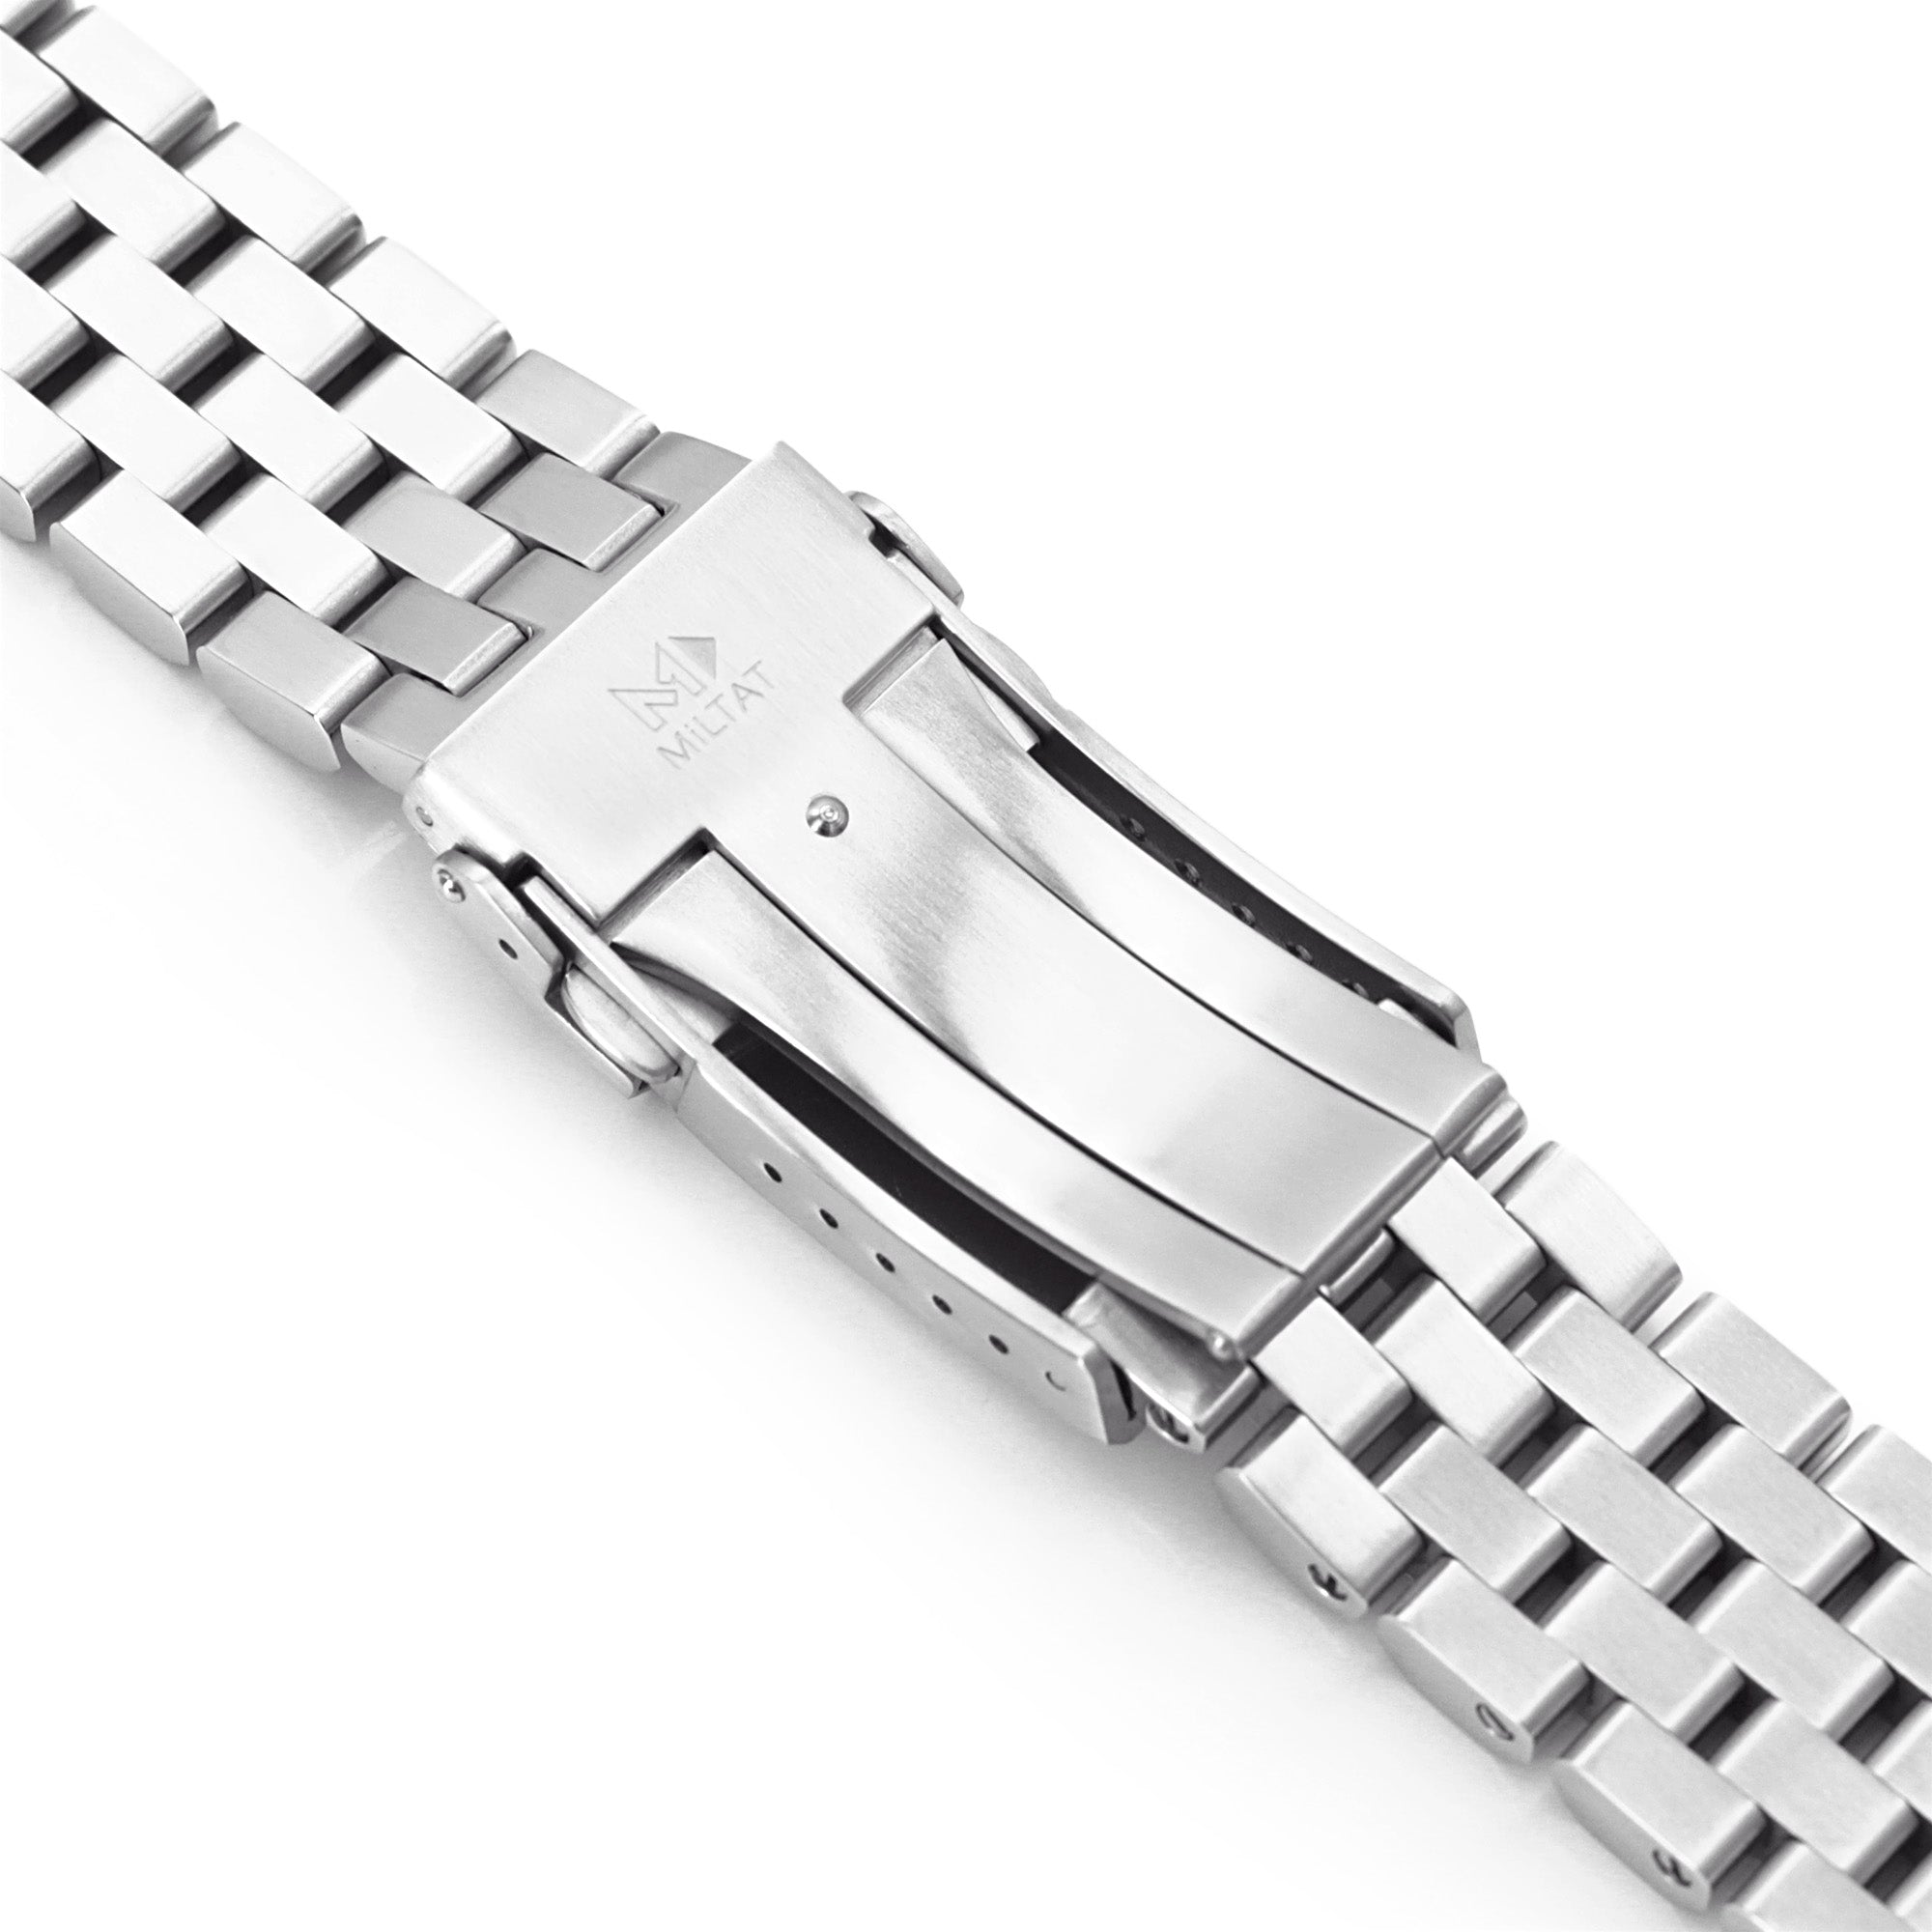 22mm Super Engineer II Straight End Watch Band Universal 1.8mm Spring Bar ver., V-Clasp Button Double Lock